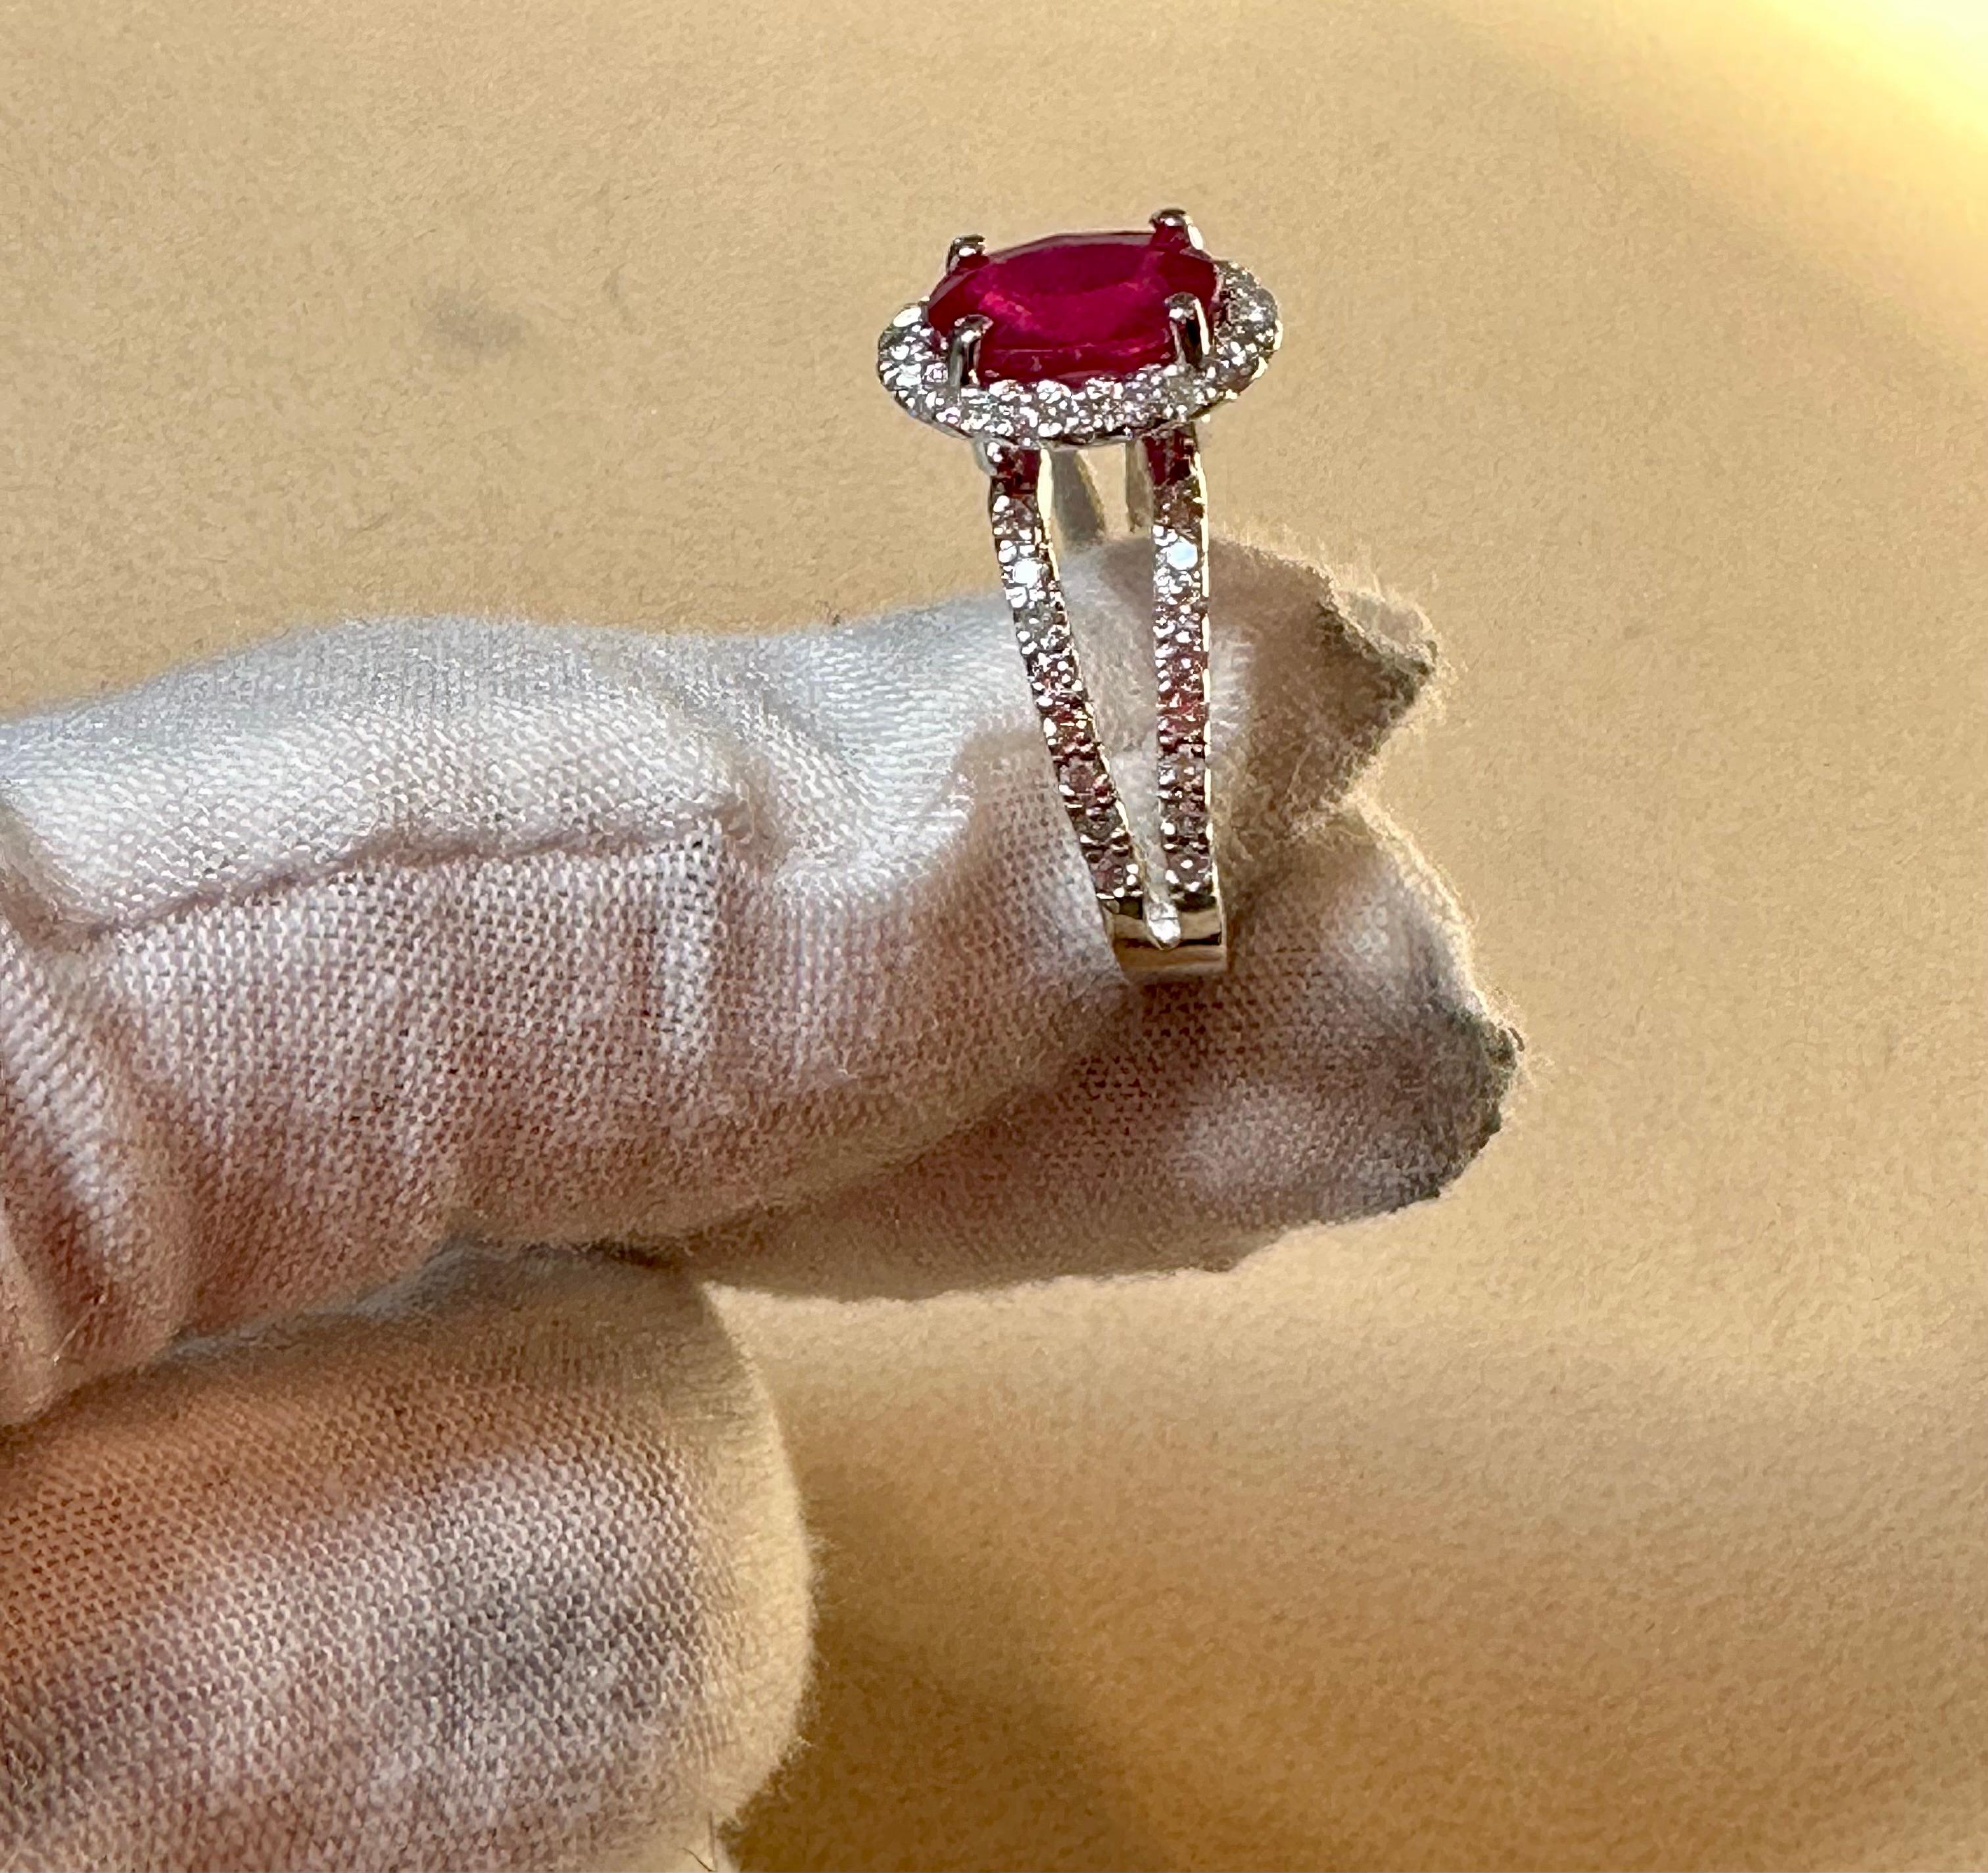 2.5 Carat Oval Treated Ruby & 2 ct Diamond Ring 14 Karat White Gold Size 7 For Sale 3